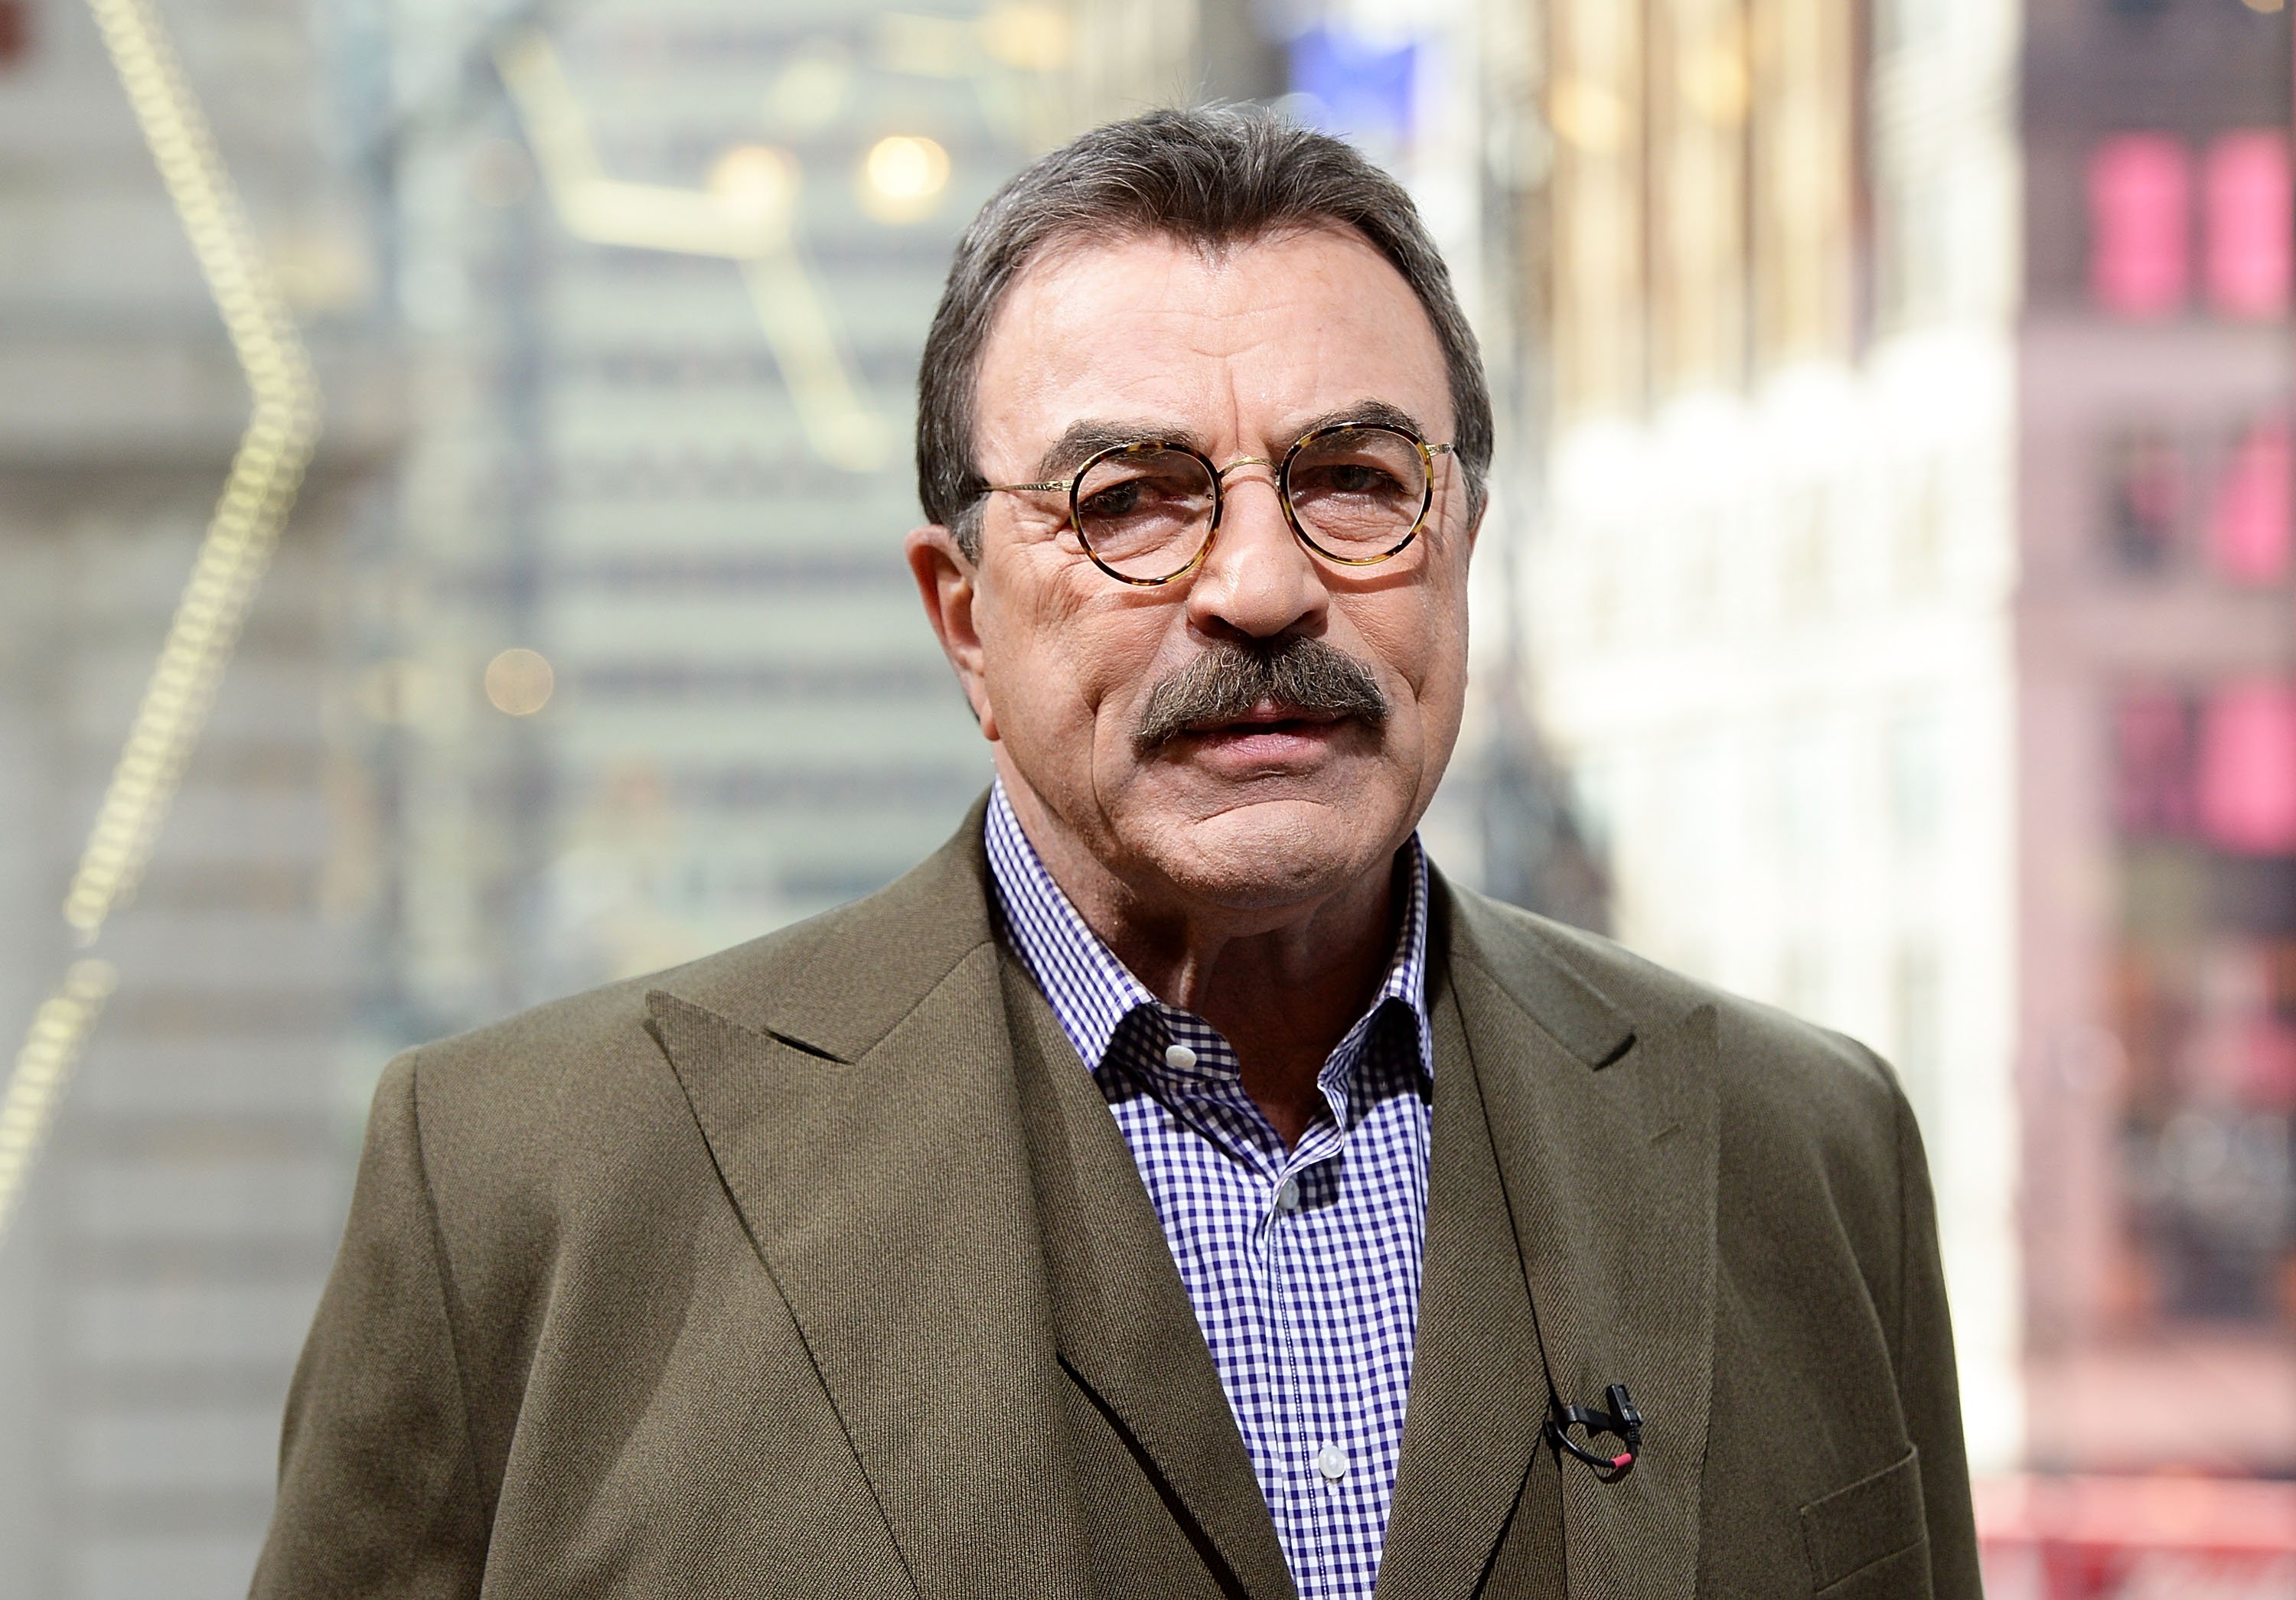 Tom Selleck visits "Extra" at H&M Times Square on October 15, 2015 in New York City. | Photo: Getty Images